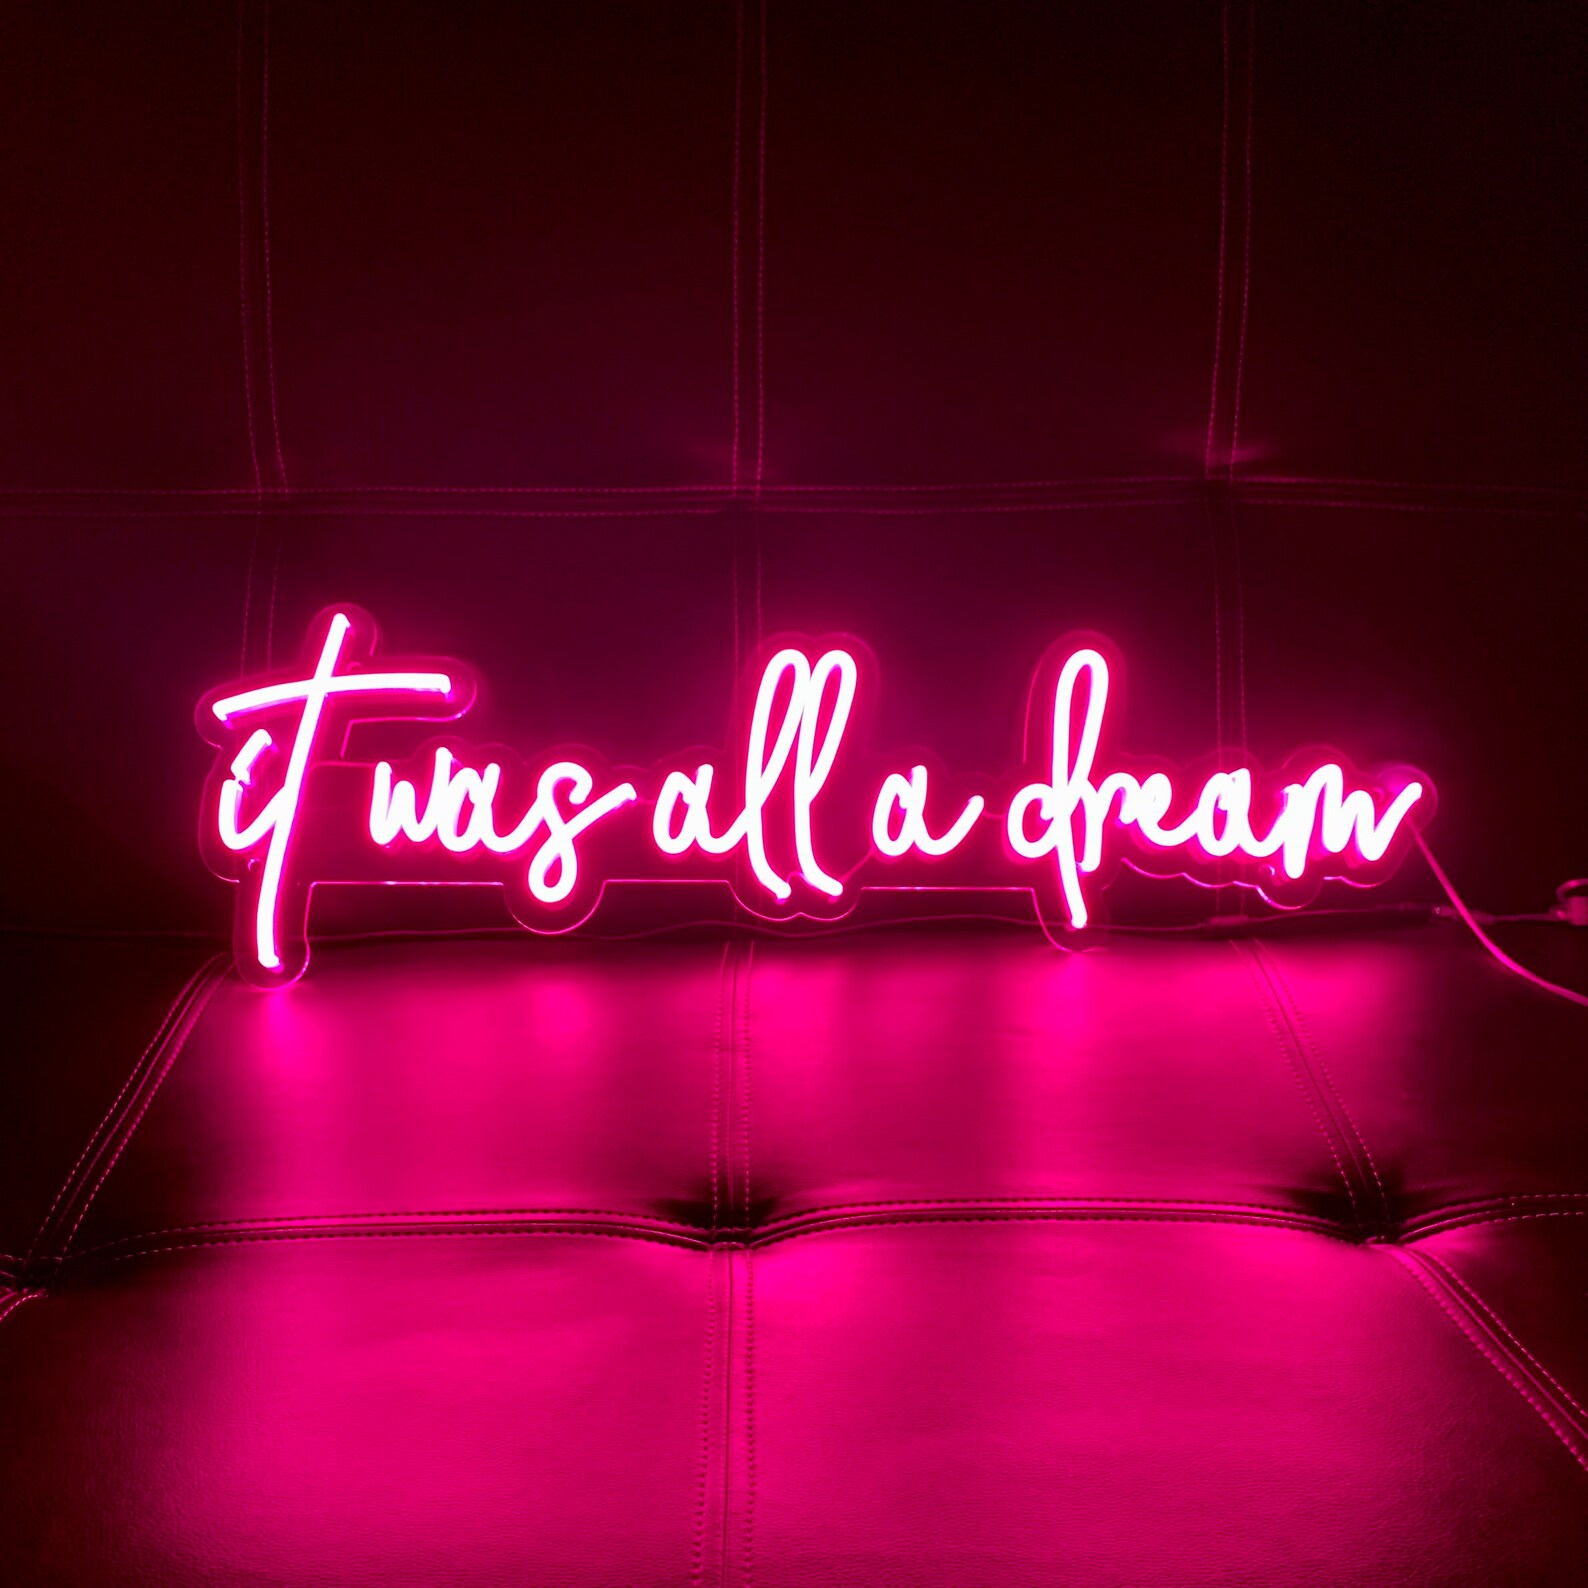 IT Was All A DREAM Neon Sign Custom Neon Sign Lights Room | Etsy